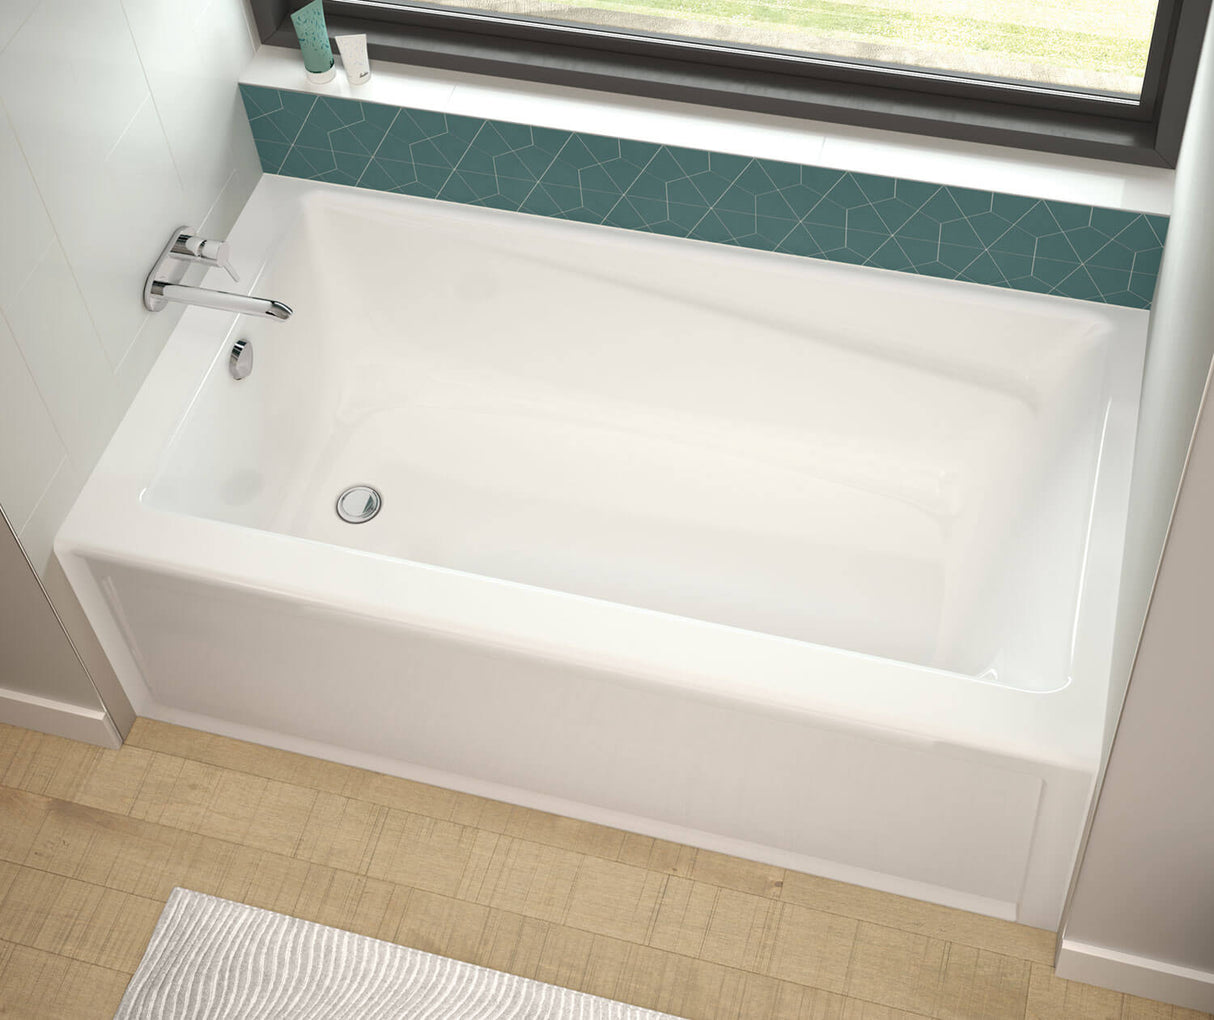 MAAX 105511-097-001-002 Exhibit 6030 IFS AFR Acrylic Alcove Right-Hand Drain Combined Whirlpool & Aeroeffect Bathtub in White